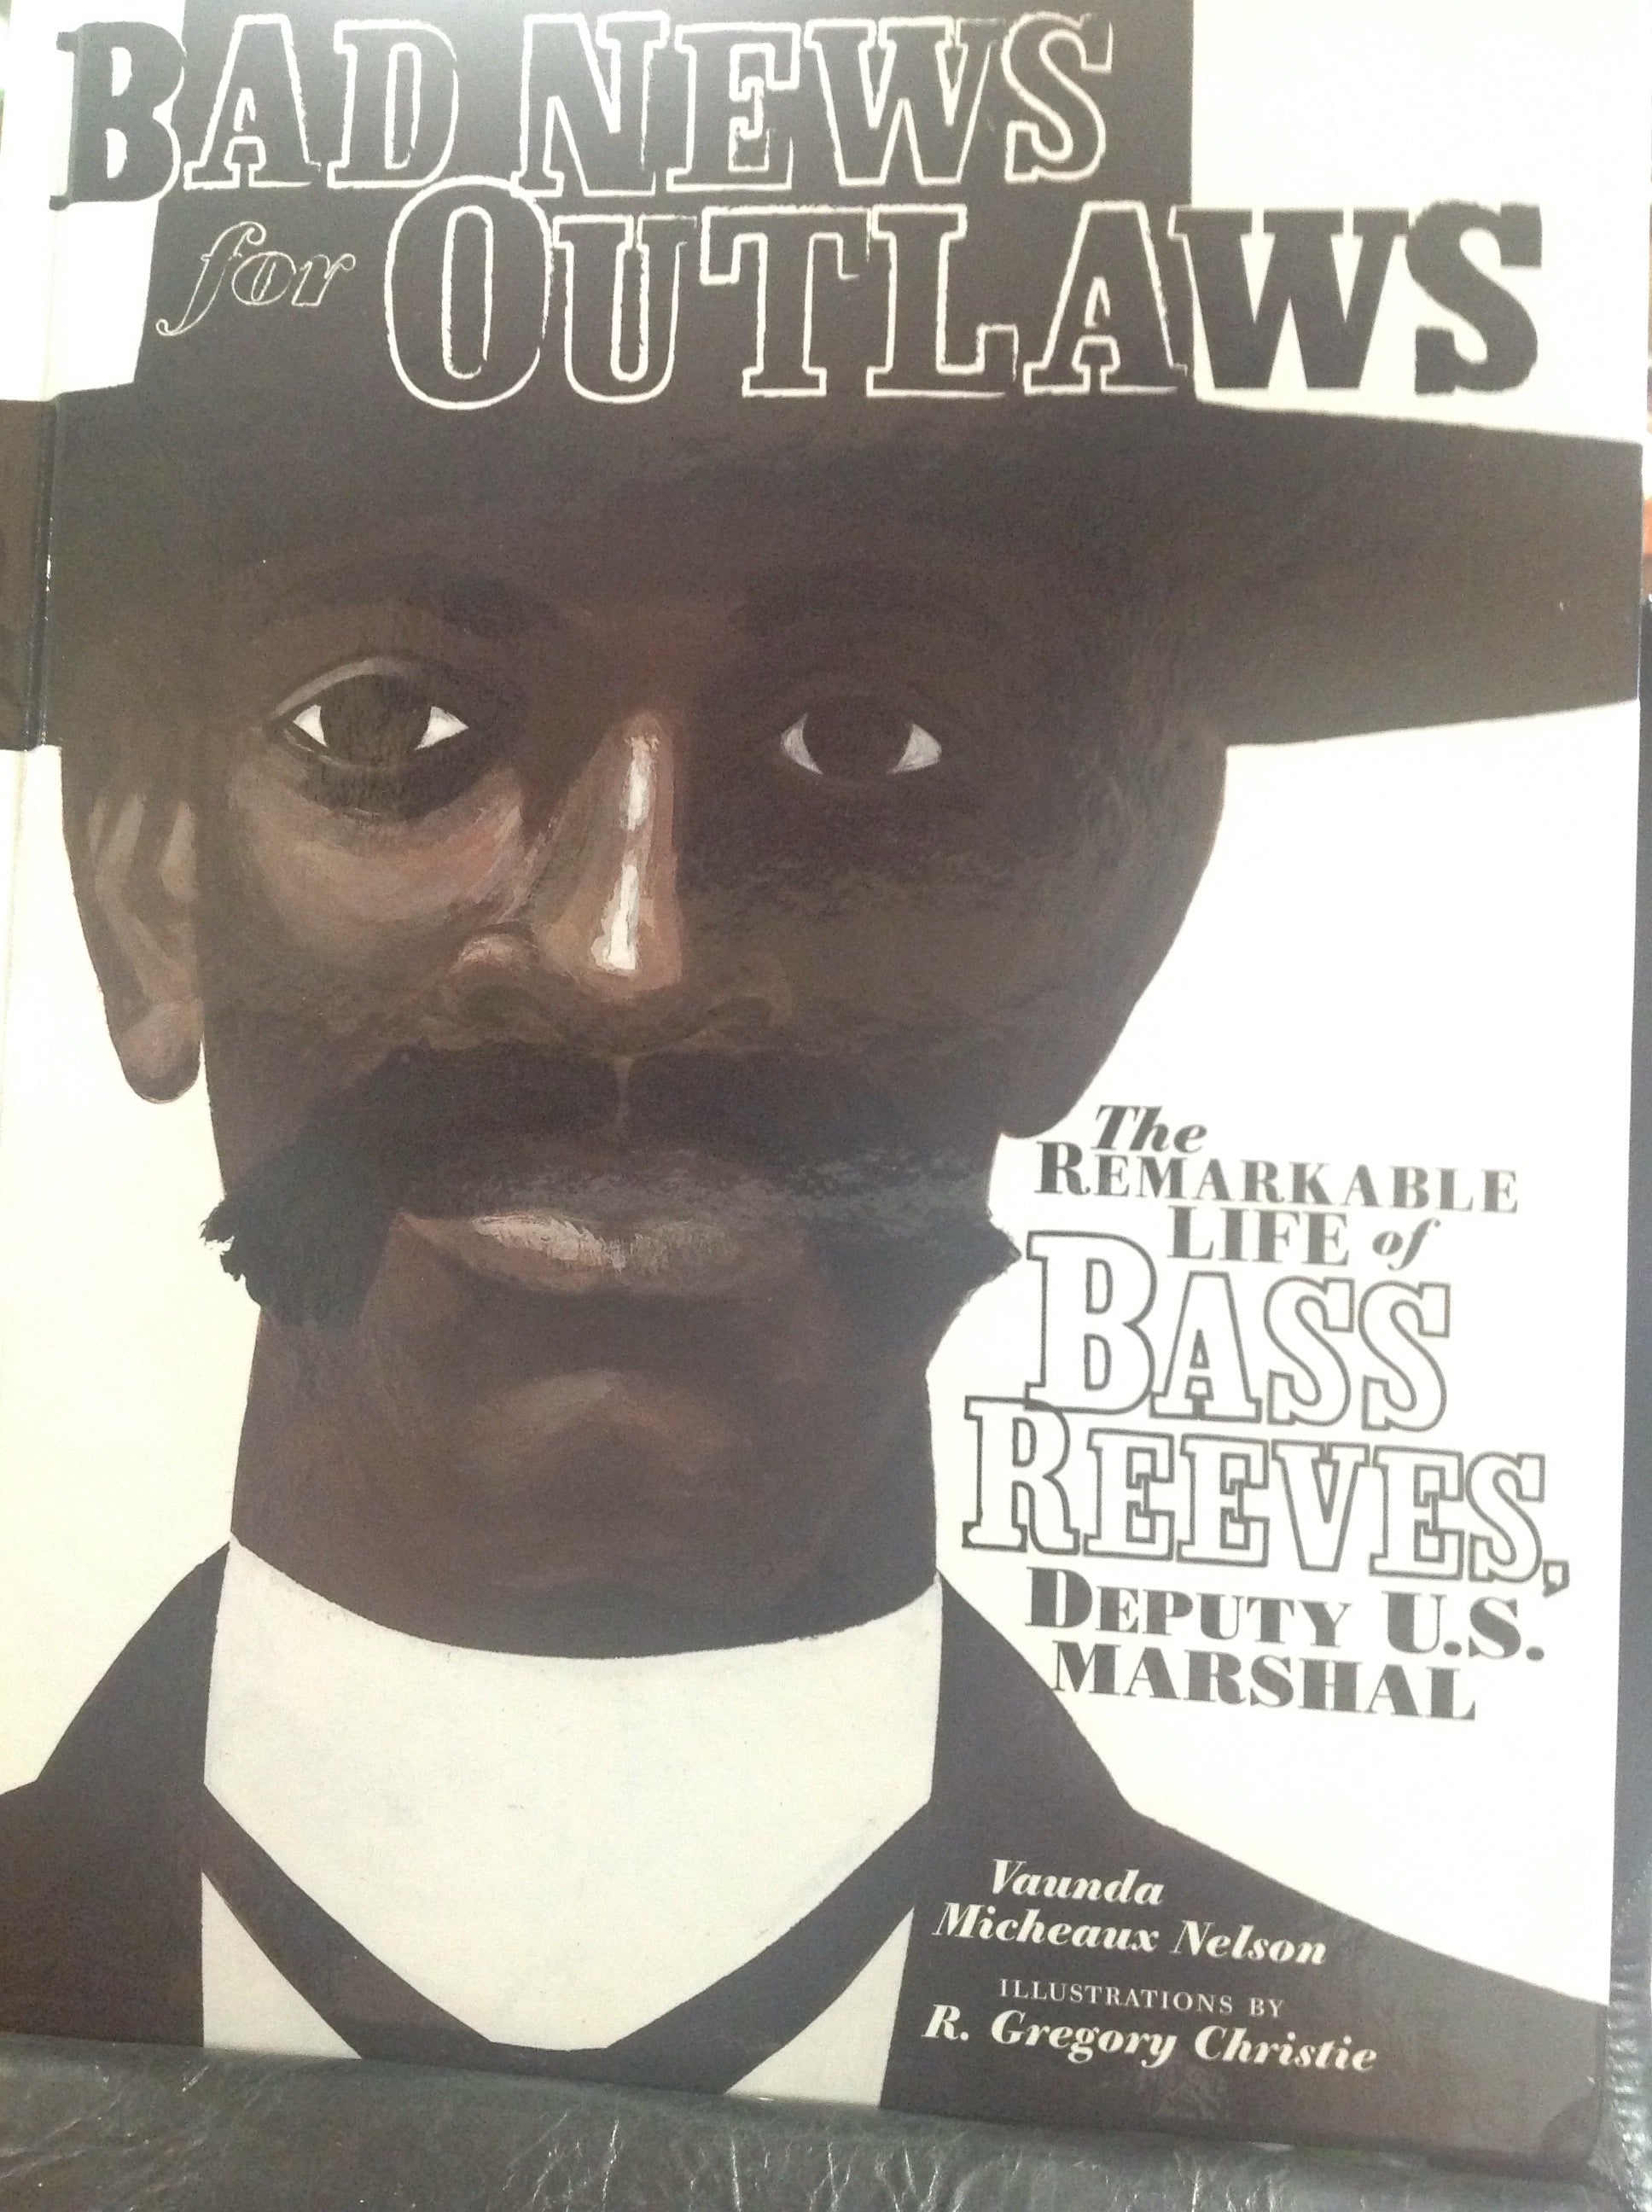 BOOKS - Bad News For Outlaws: The Remarkable Life of Bass Reeves, Deputy U.S. Marshall